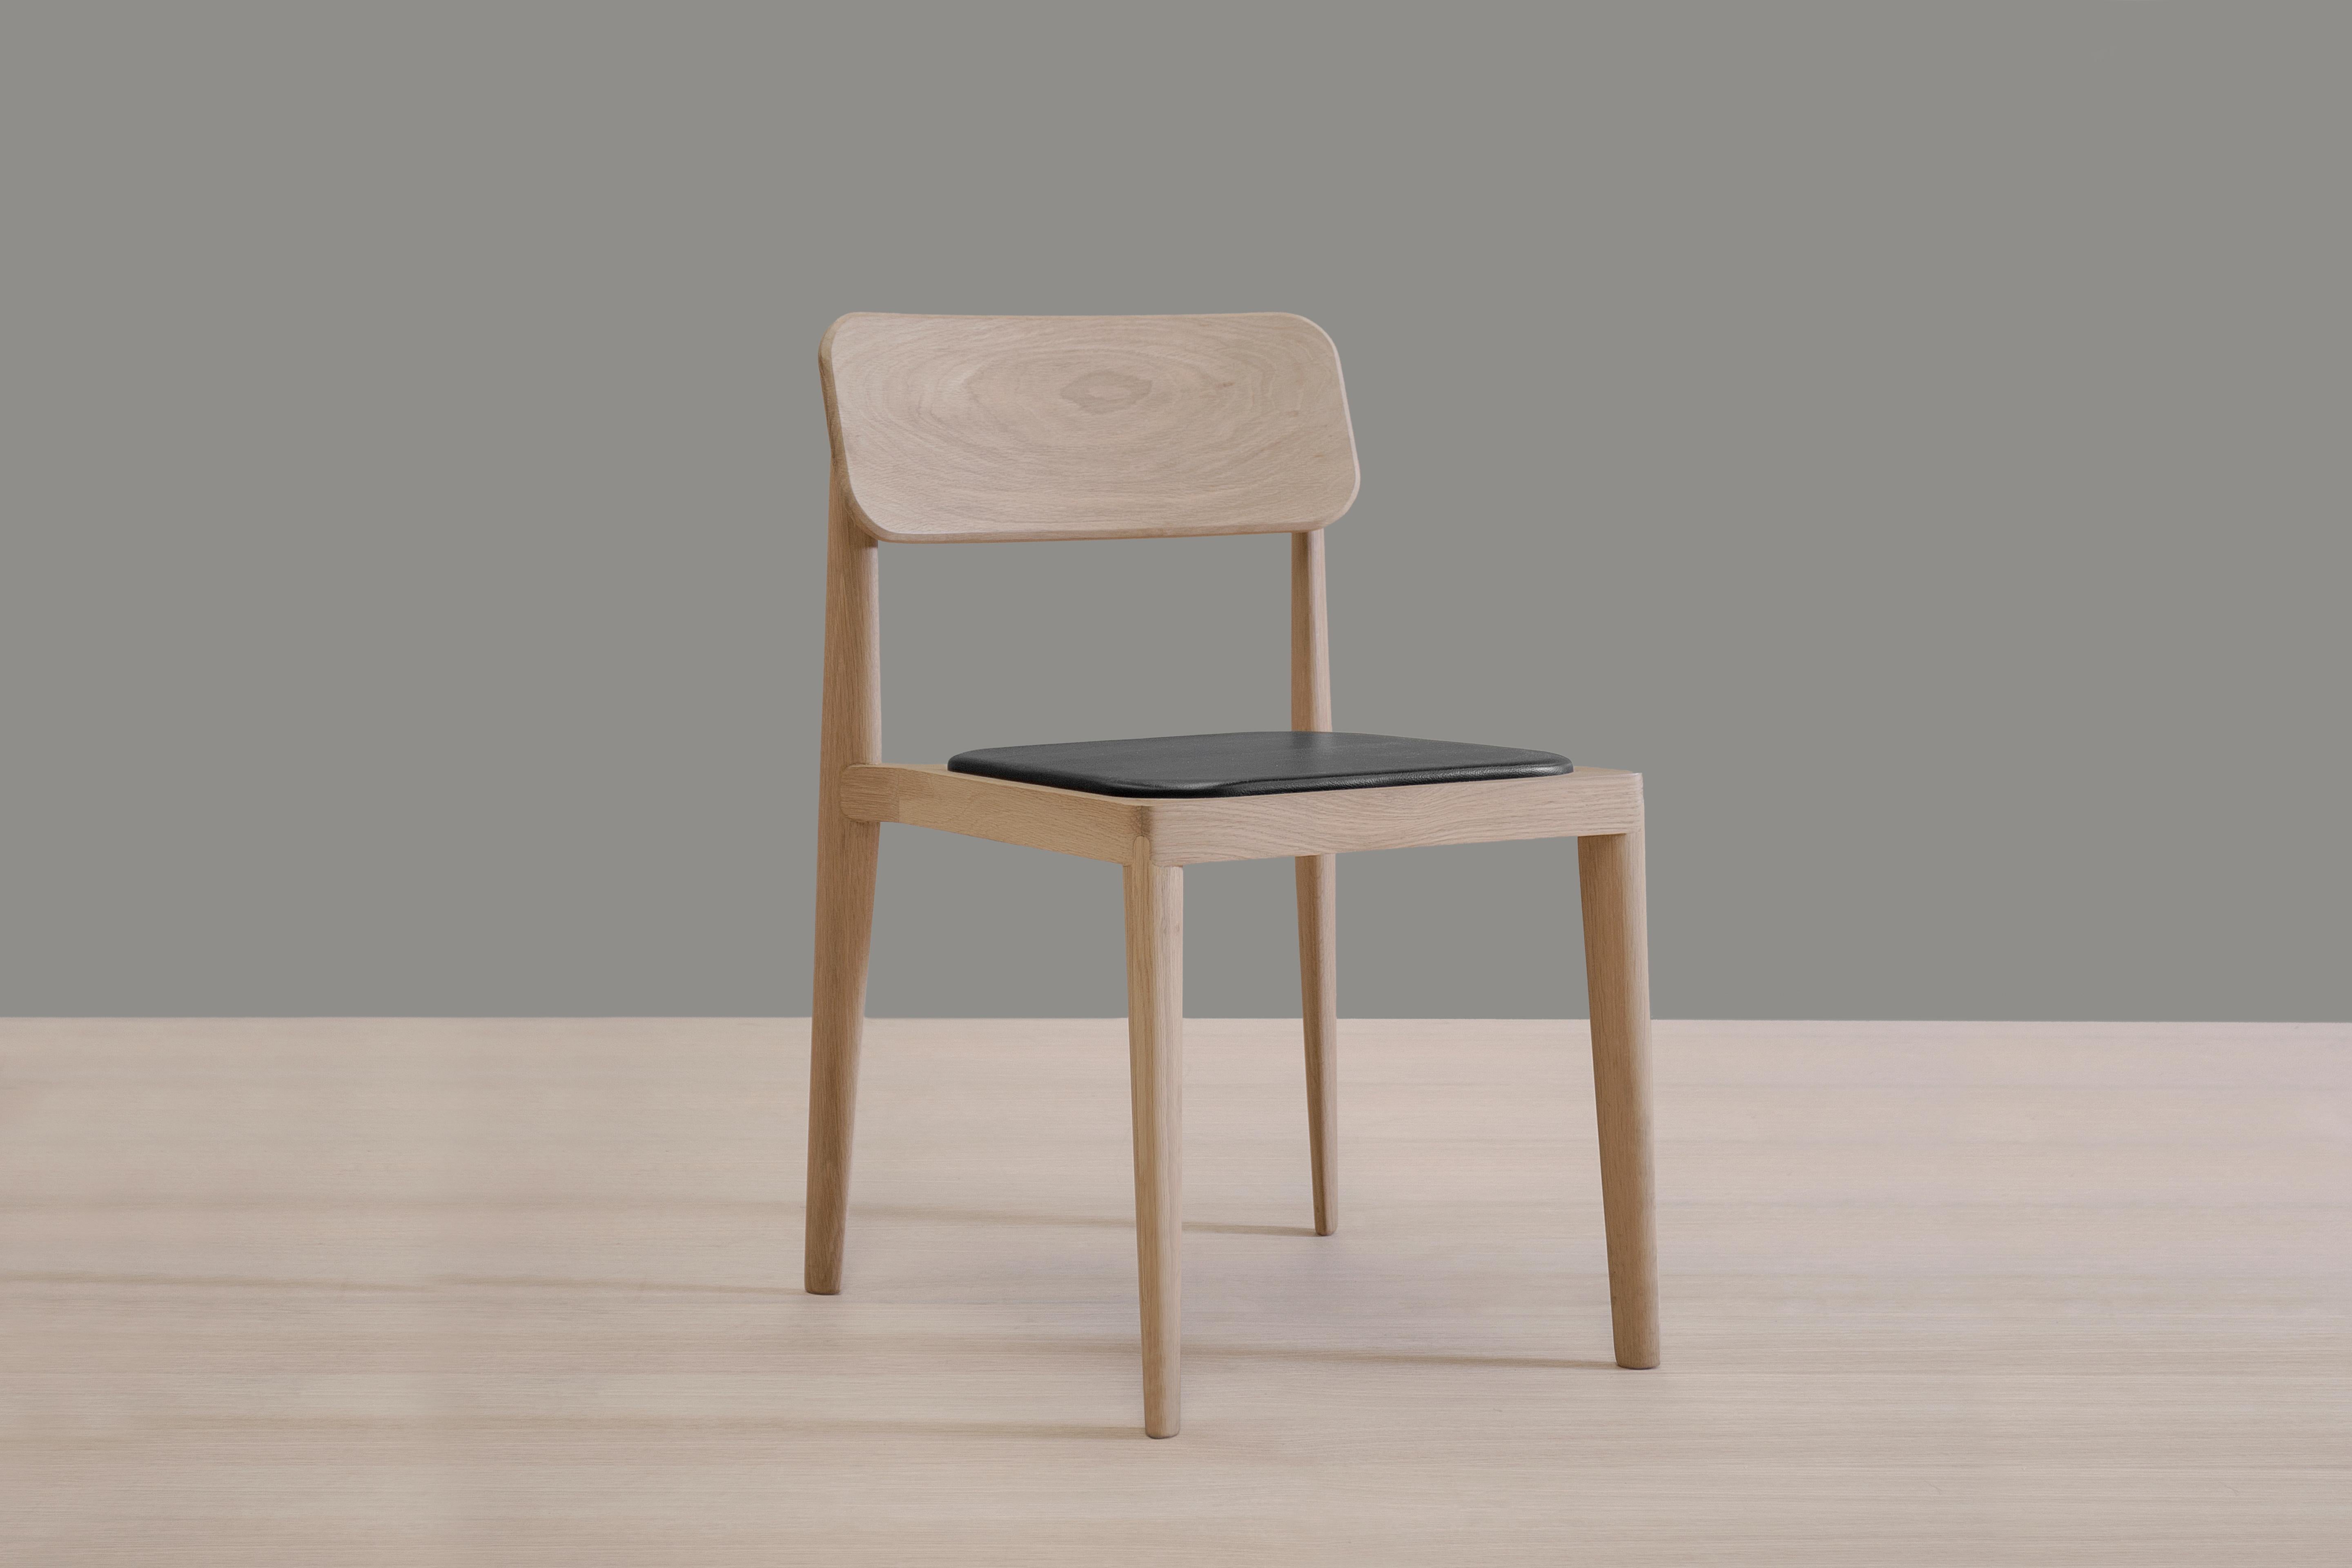 Gerard dining chair by Thai Hua
Dimensions: D 48 x W 50 x H 78 cm
Materials: oak wood, leather.
Dining chair made of natural white oak and leather.
Thai Hua is an Industrial designer originally from Vietnam trained in Switzerland. Since 2003 Thai